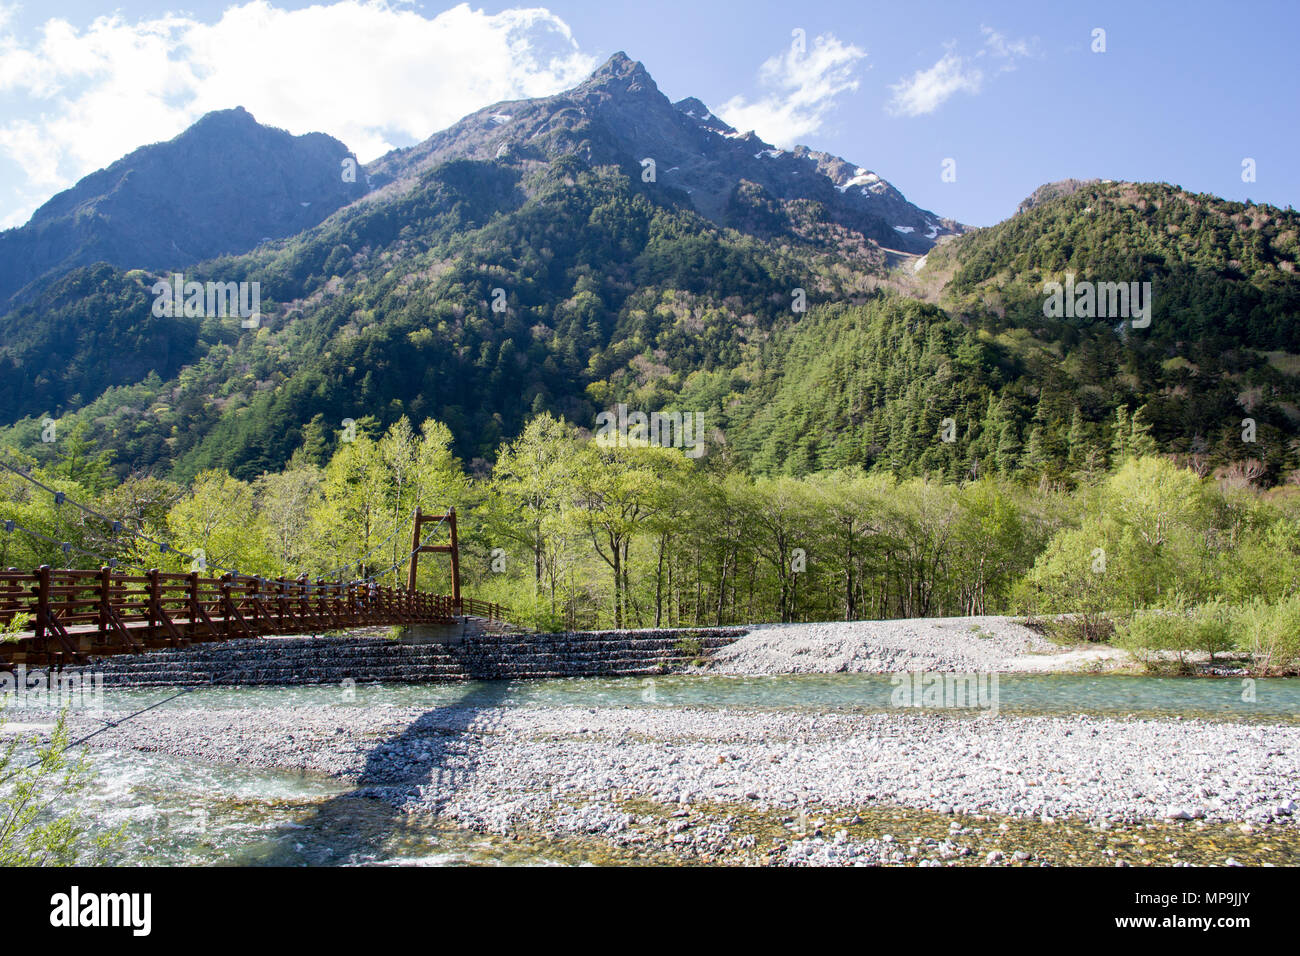 A suspension bridge crosses the river in the Kamikochi region of the Japanese Alps, Nagano, with lush green trees and high mountains in the background Stock Photo